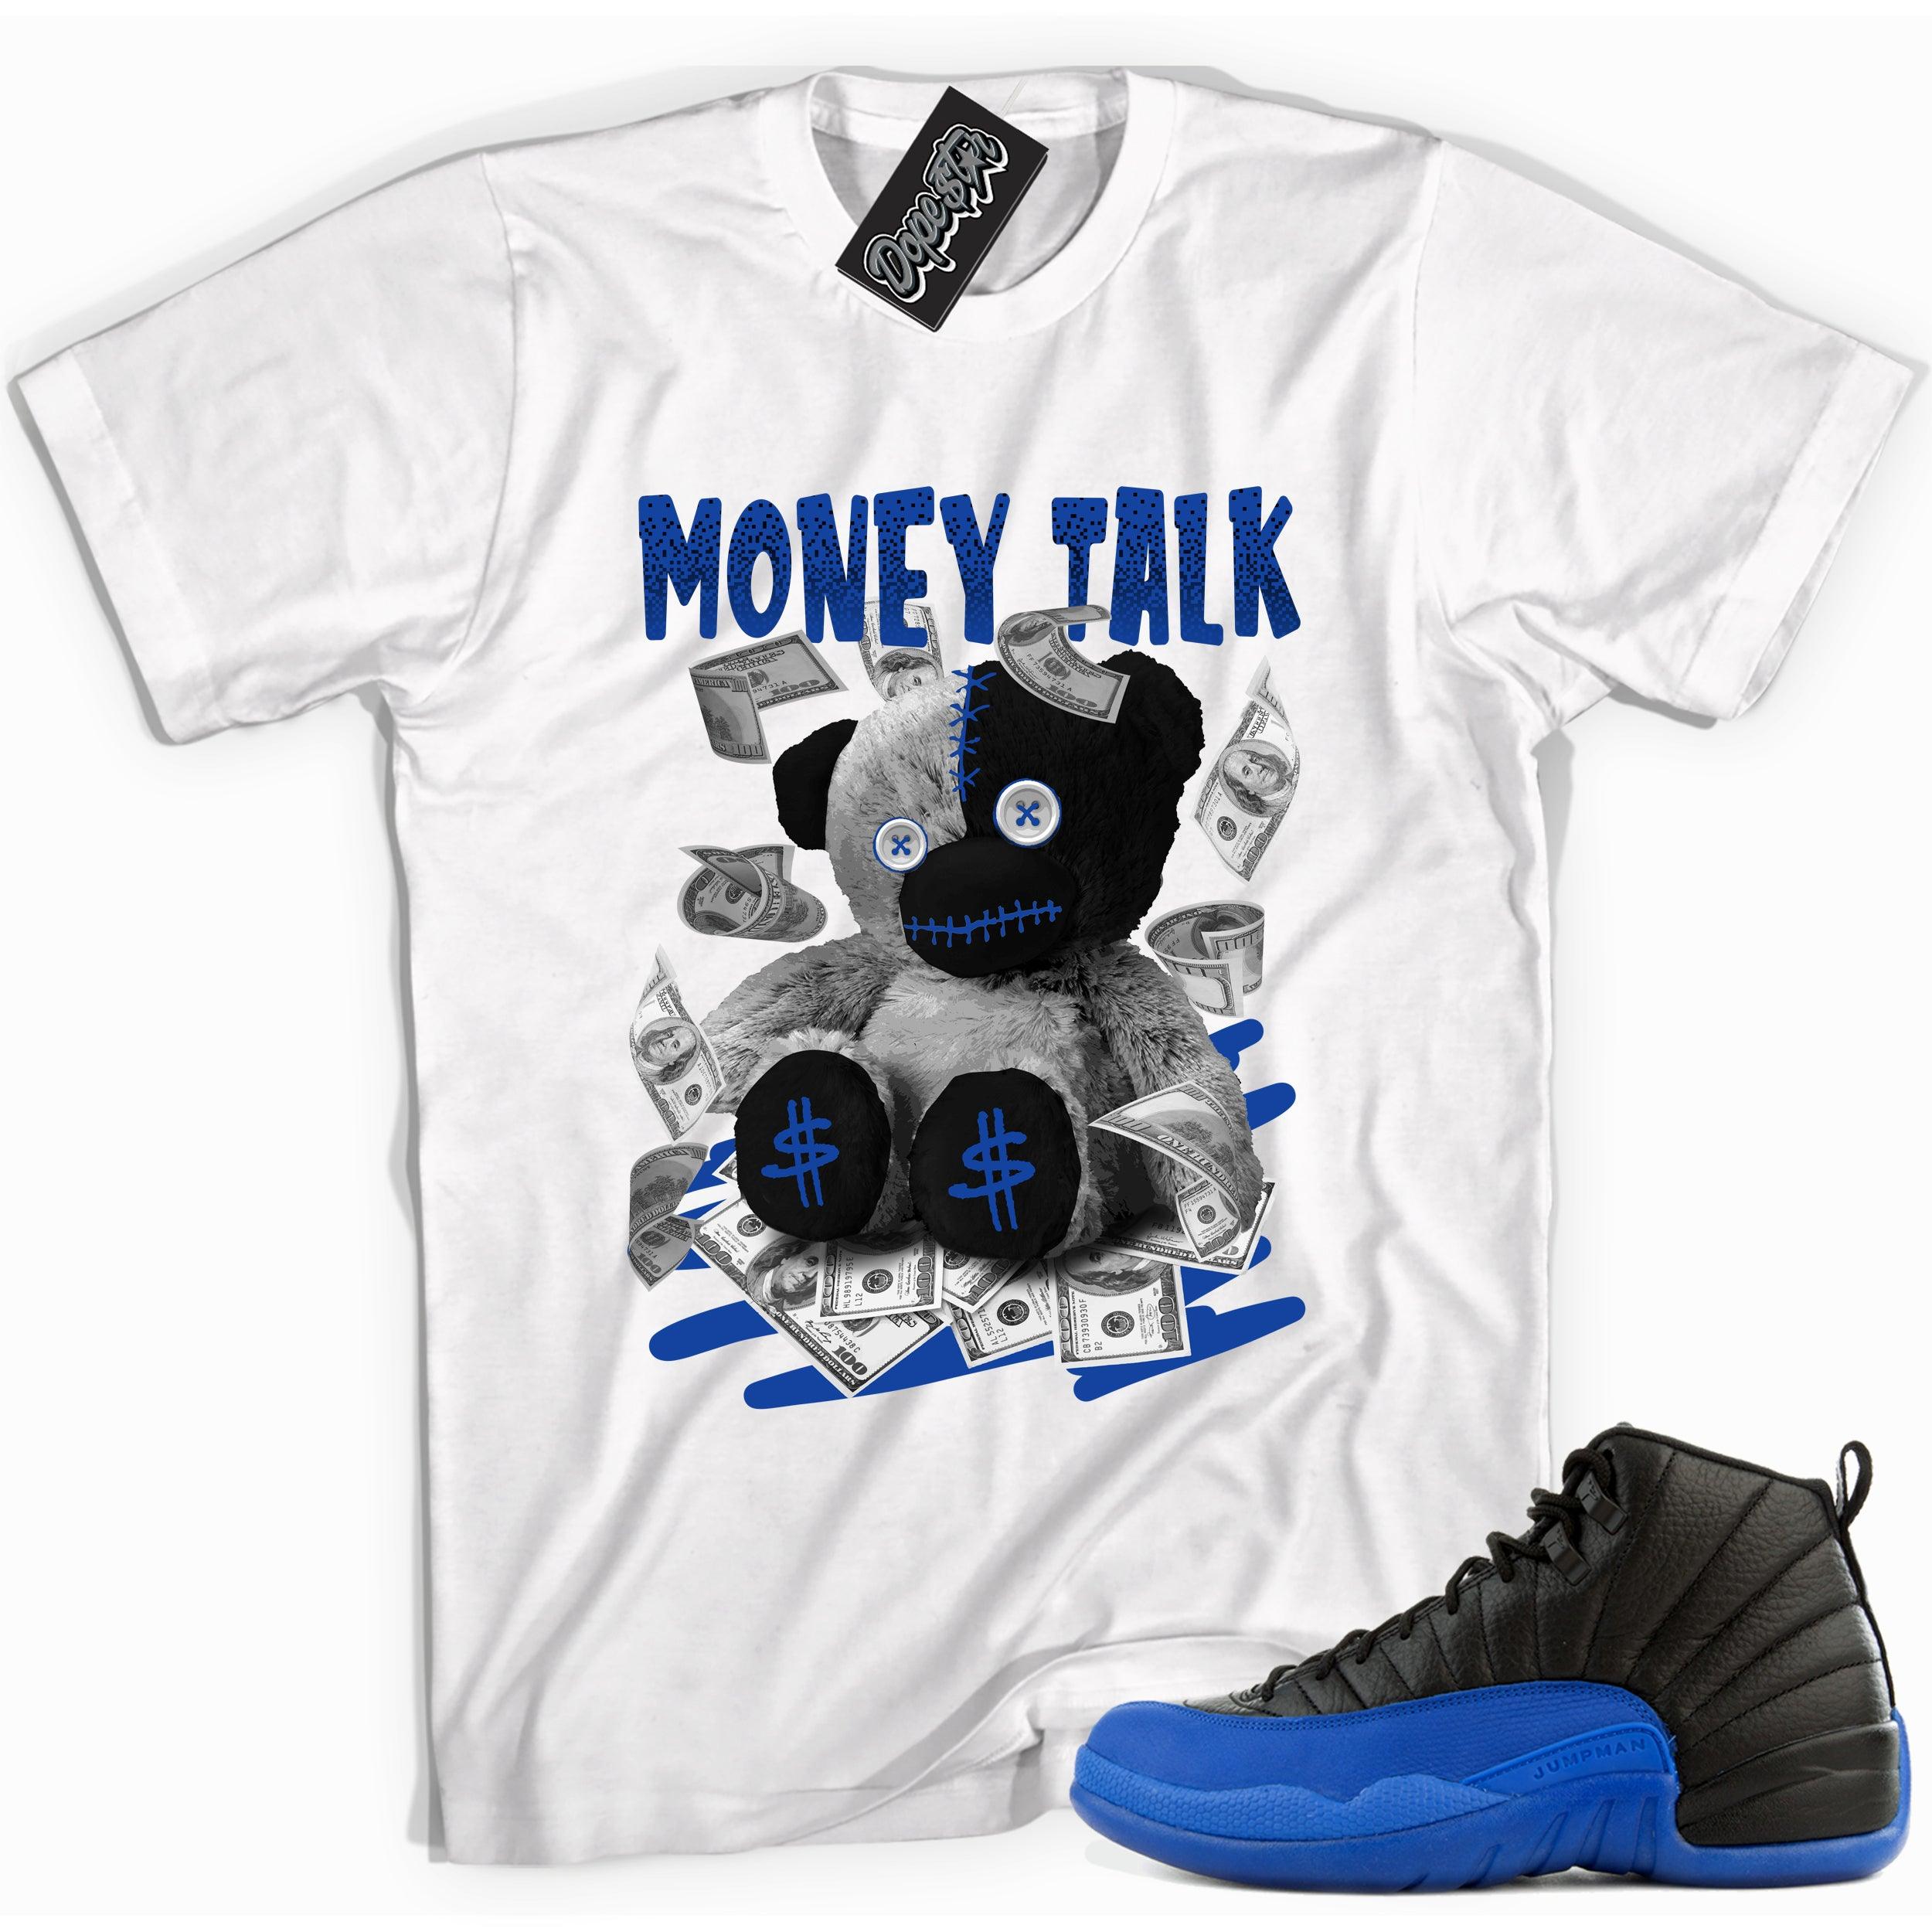 Cool white graphic tee with 'money talk bear' print, that perfectly matches Air Jordan 12 Retro Black Game Royal sneakers.